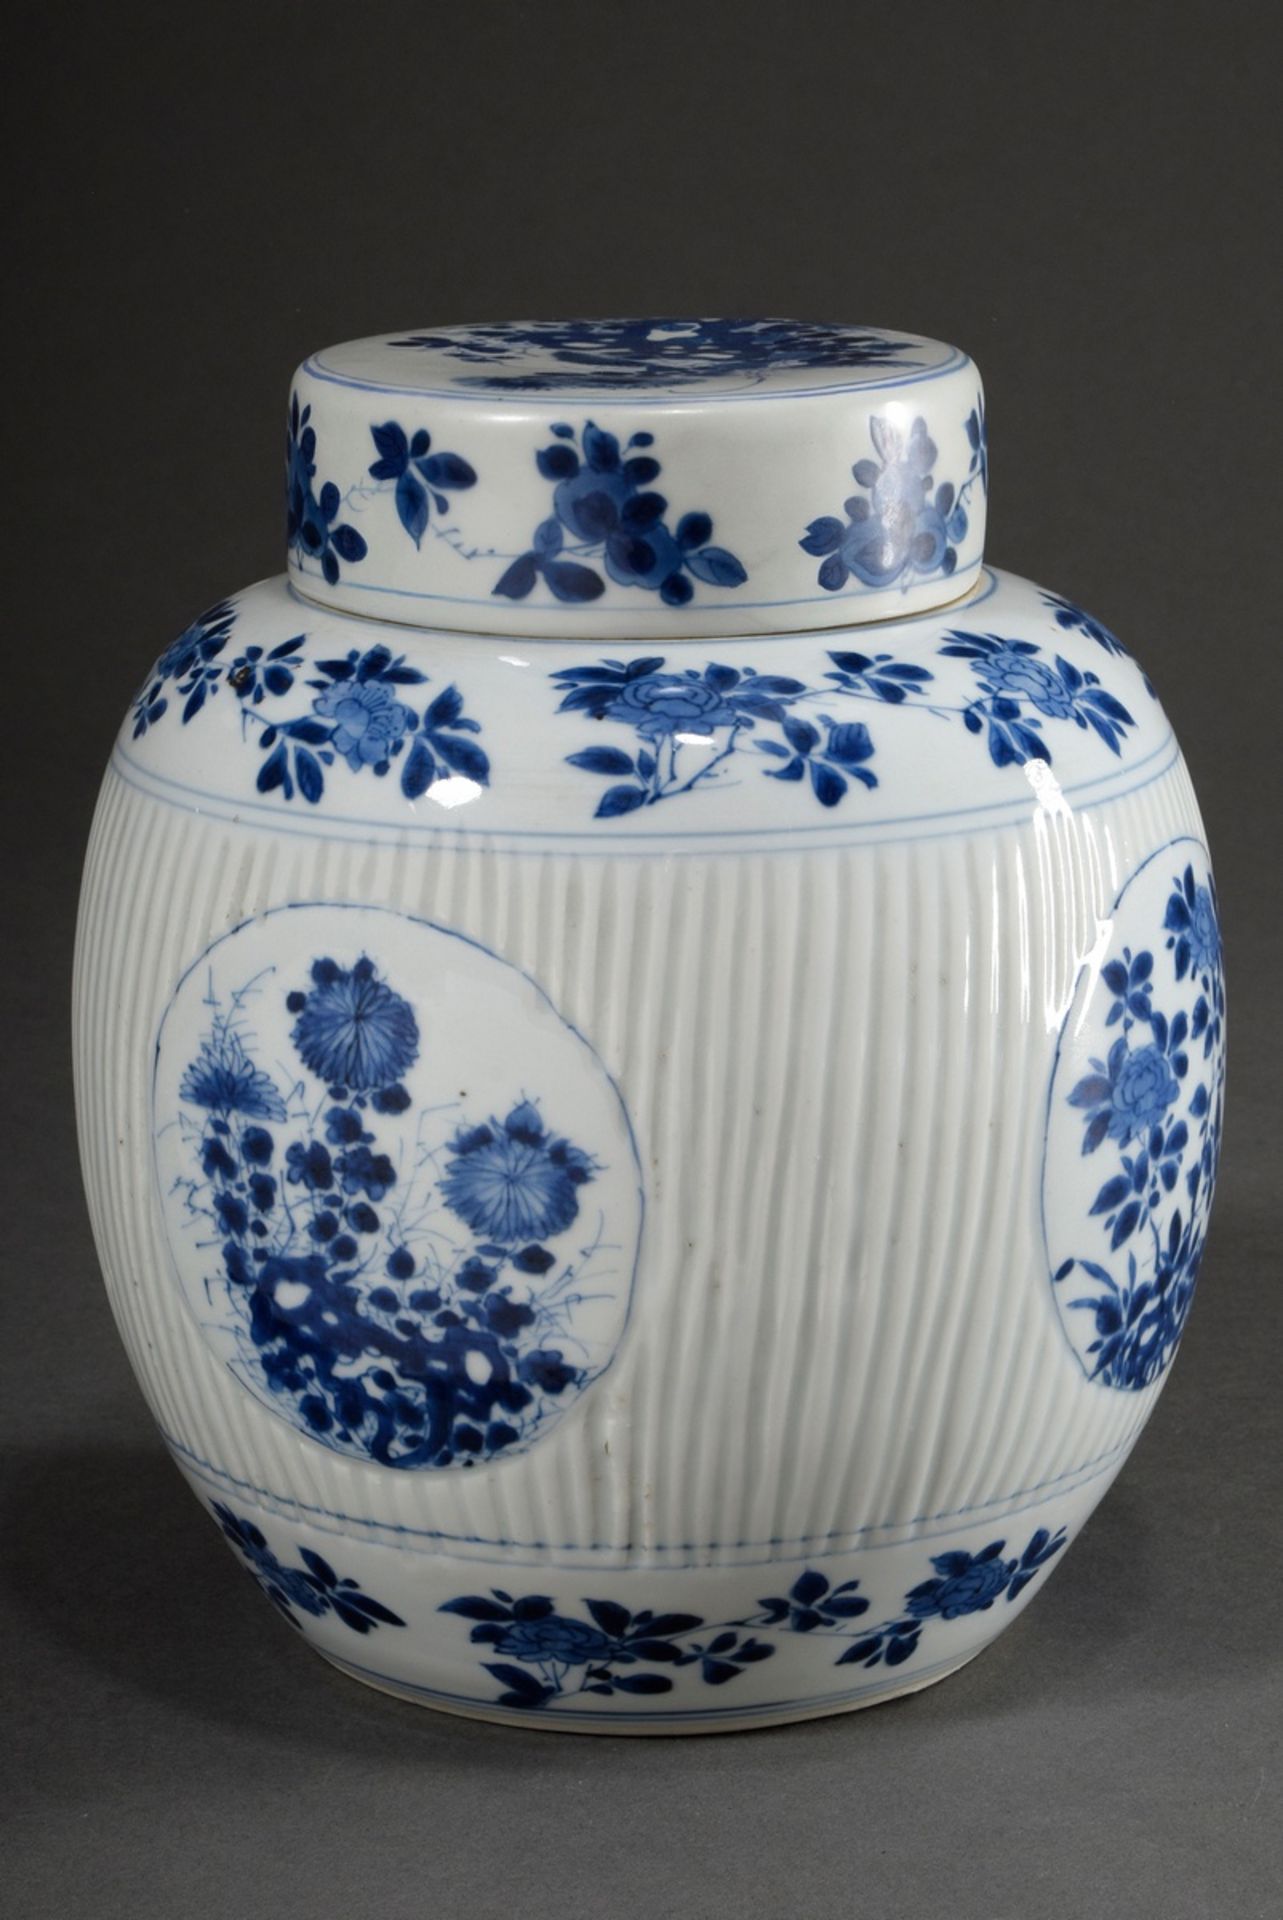 Chinese porcelain ginger pot with grooved body and floral blue painting reserves on the wall, botto